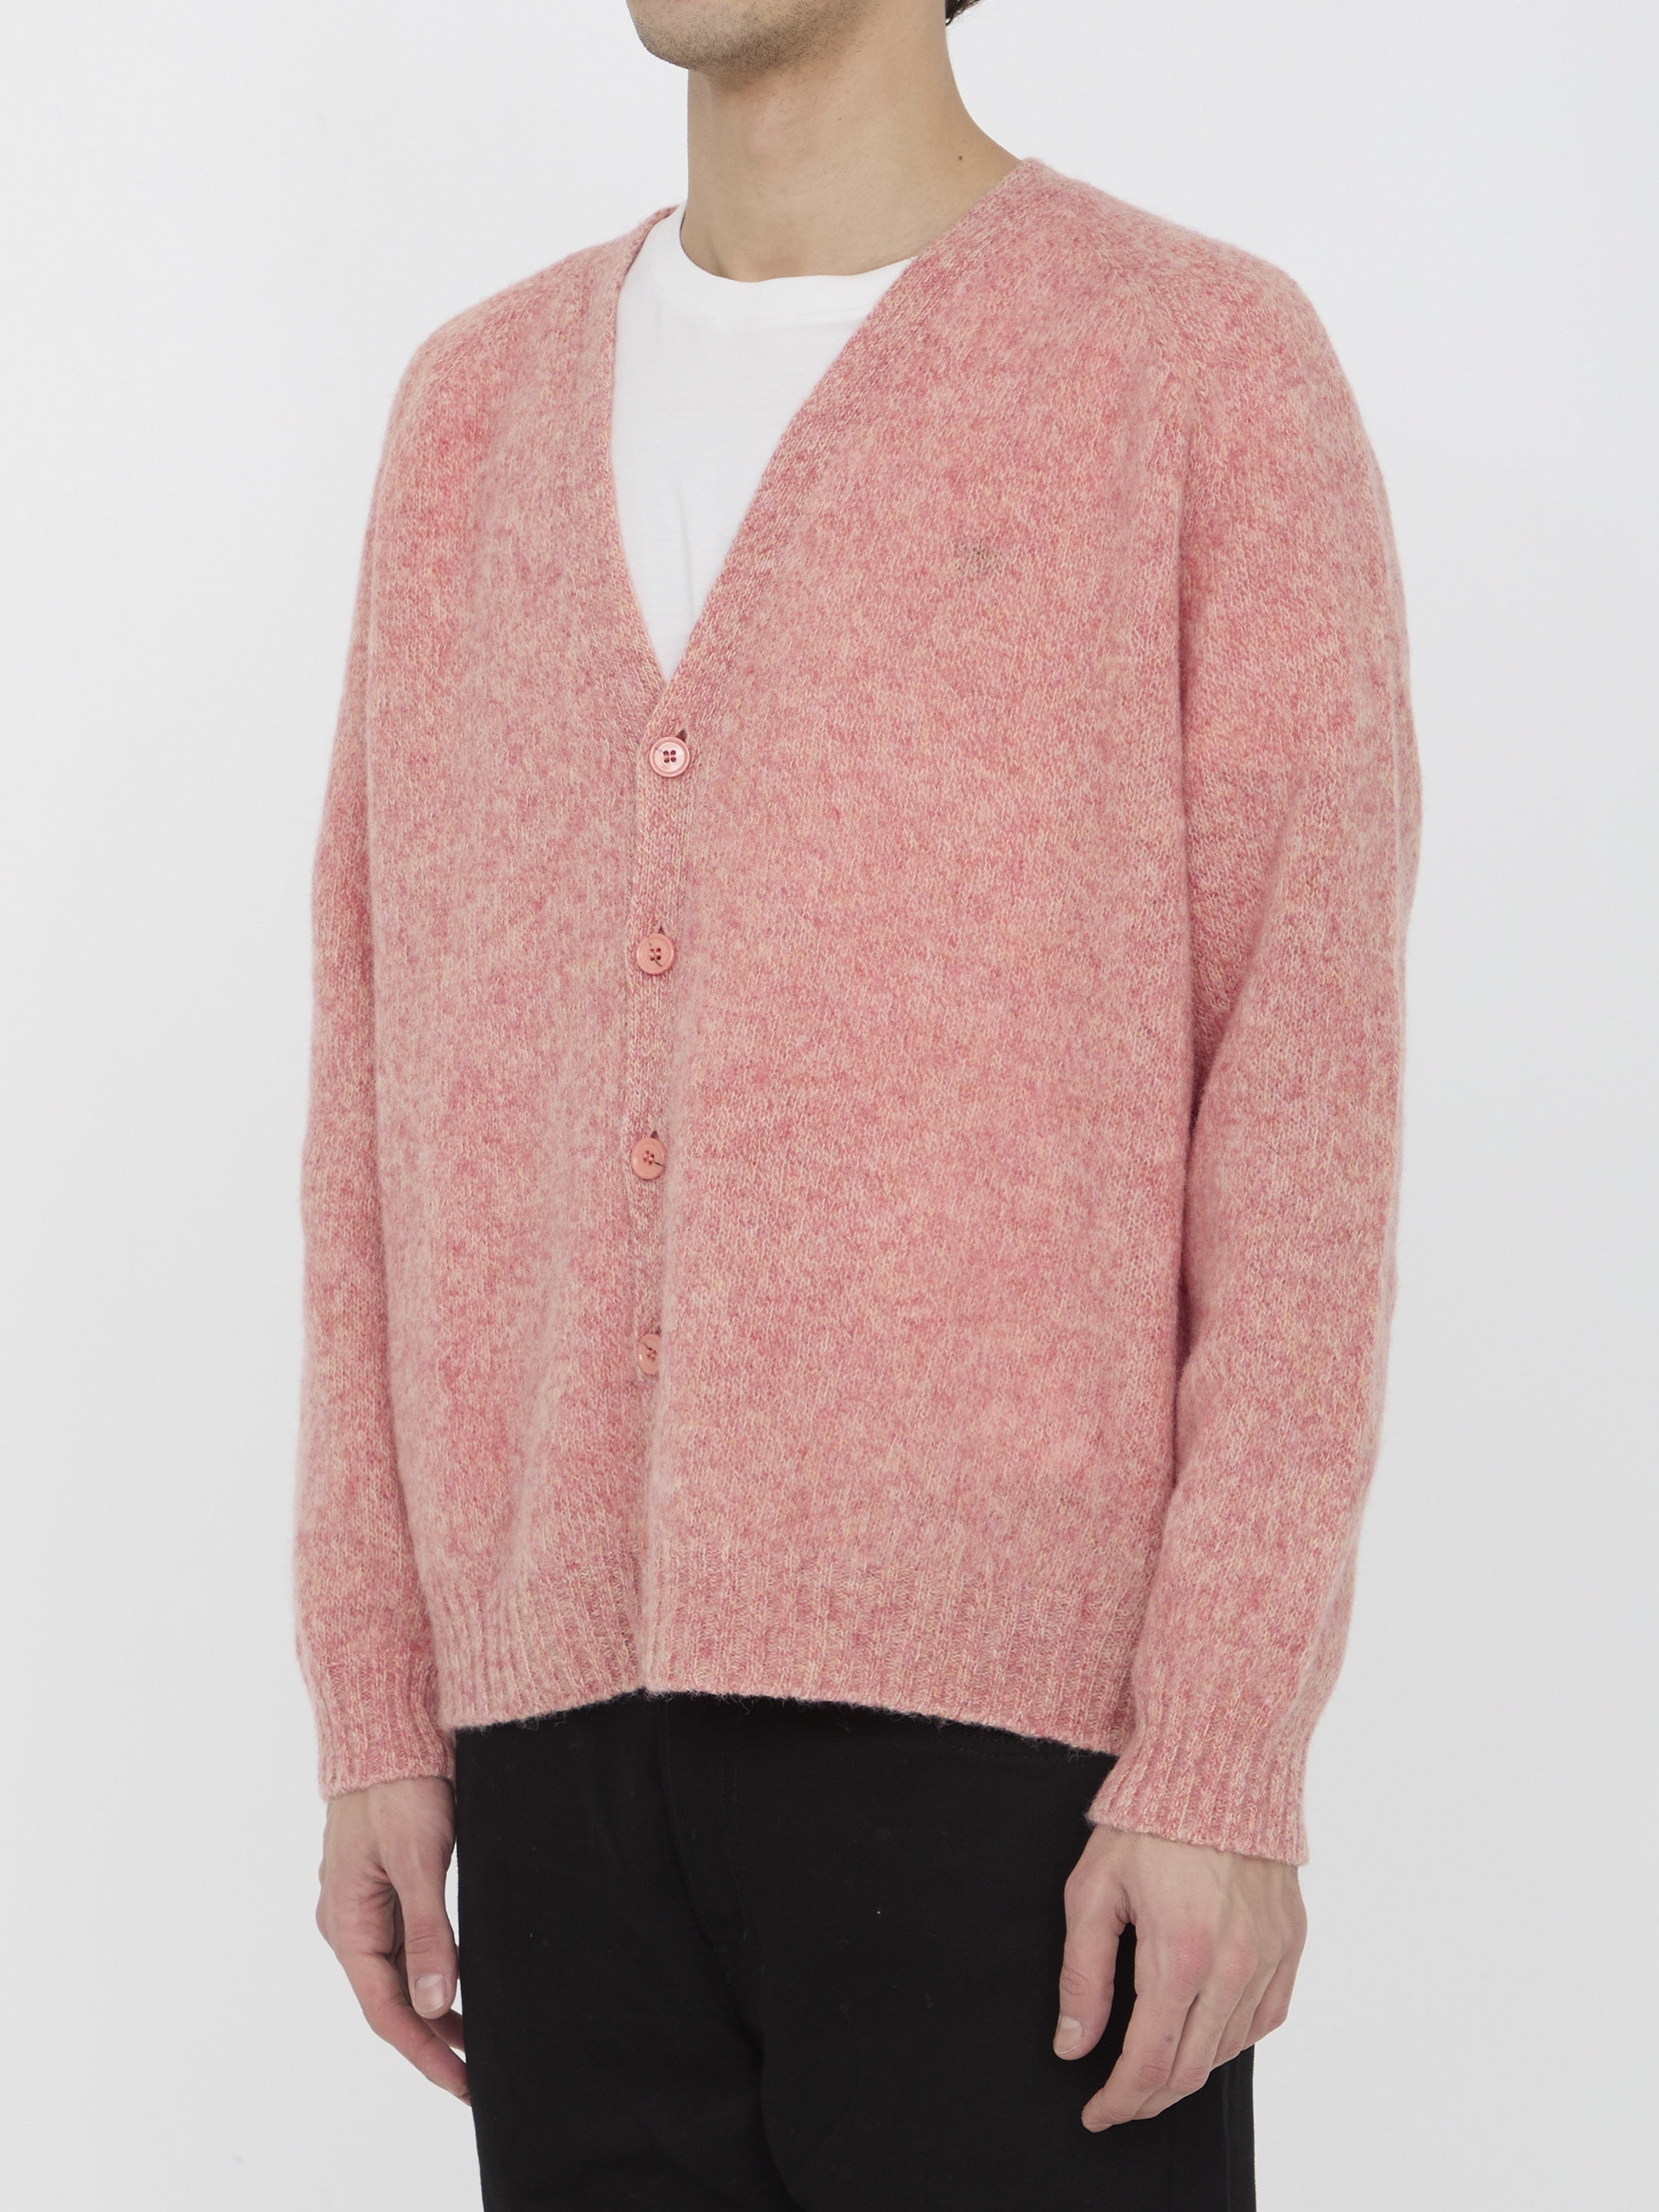 LOEWE-OUTLET-SALE-Wool-cardigan-Strick-ARCHIVE-COLLECTION-2.jpg